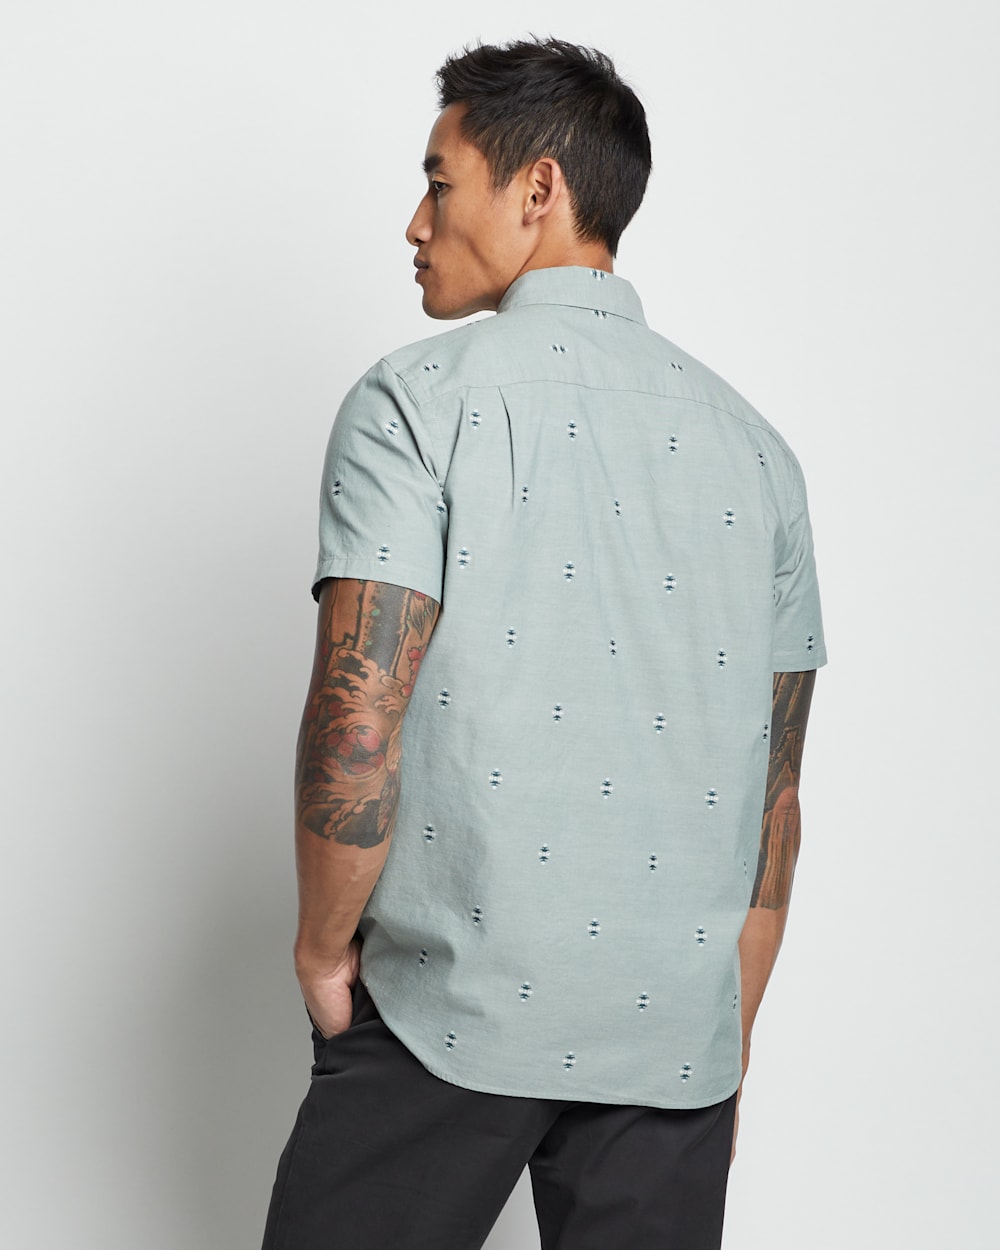 ALTERNATE VIEW OF MEN'S SHORT-SLEEVE CARSON CHAMBRAY DOBBY SHIRT IN CHAMBRAY DOBBY image number 4